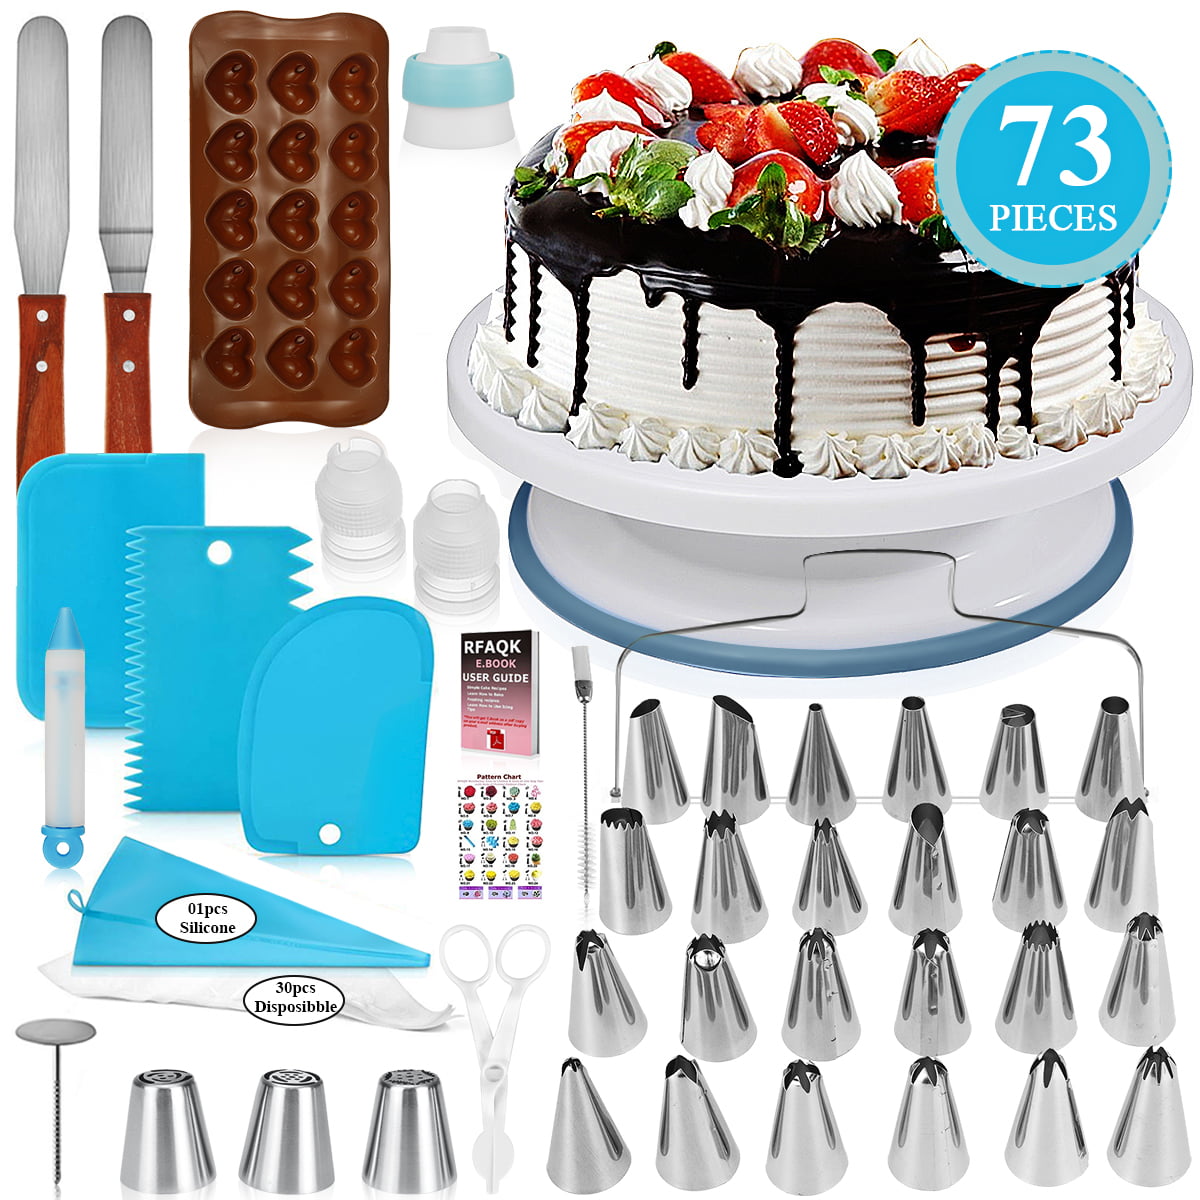 70 Turntable-Rotating Cake stand-24 Numbered Easy to use Icing Tips with Pattern Chart and E.Book-Straight and Angled Spatula-3 Cake Scrapers 70 Pcs Cake Decorating Equipment